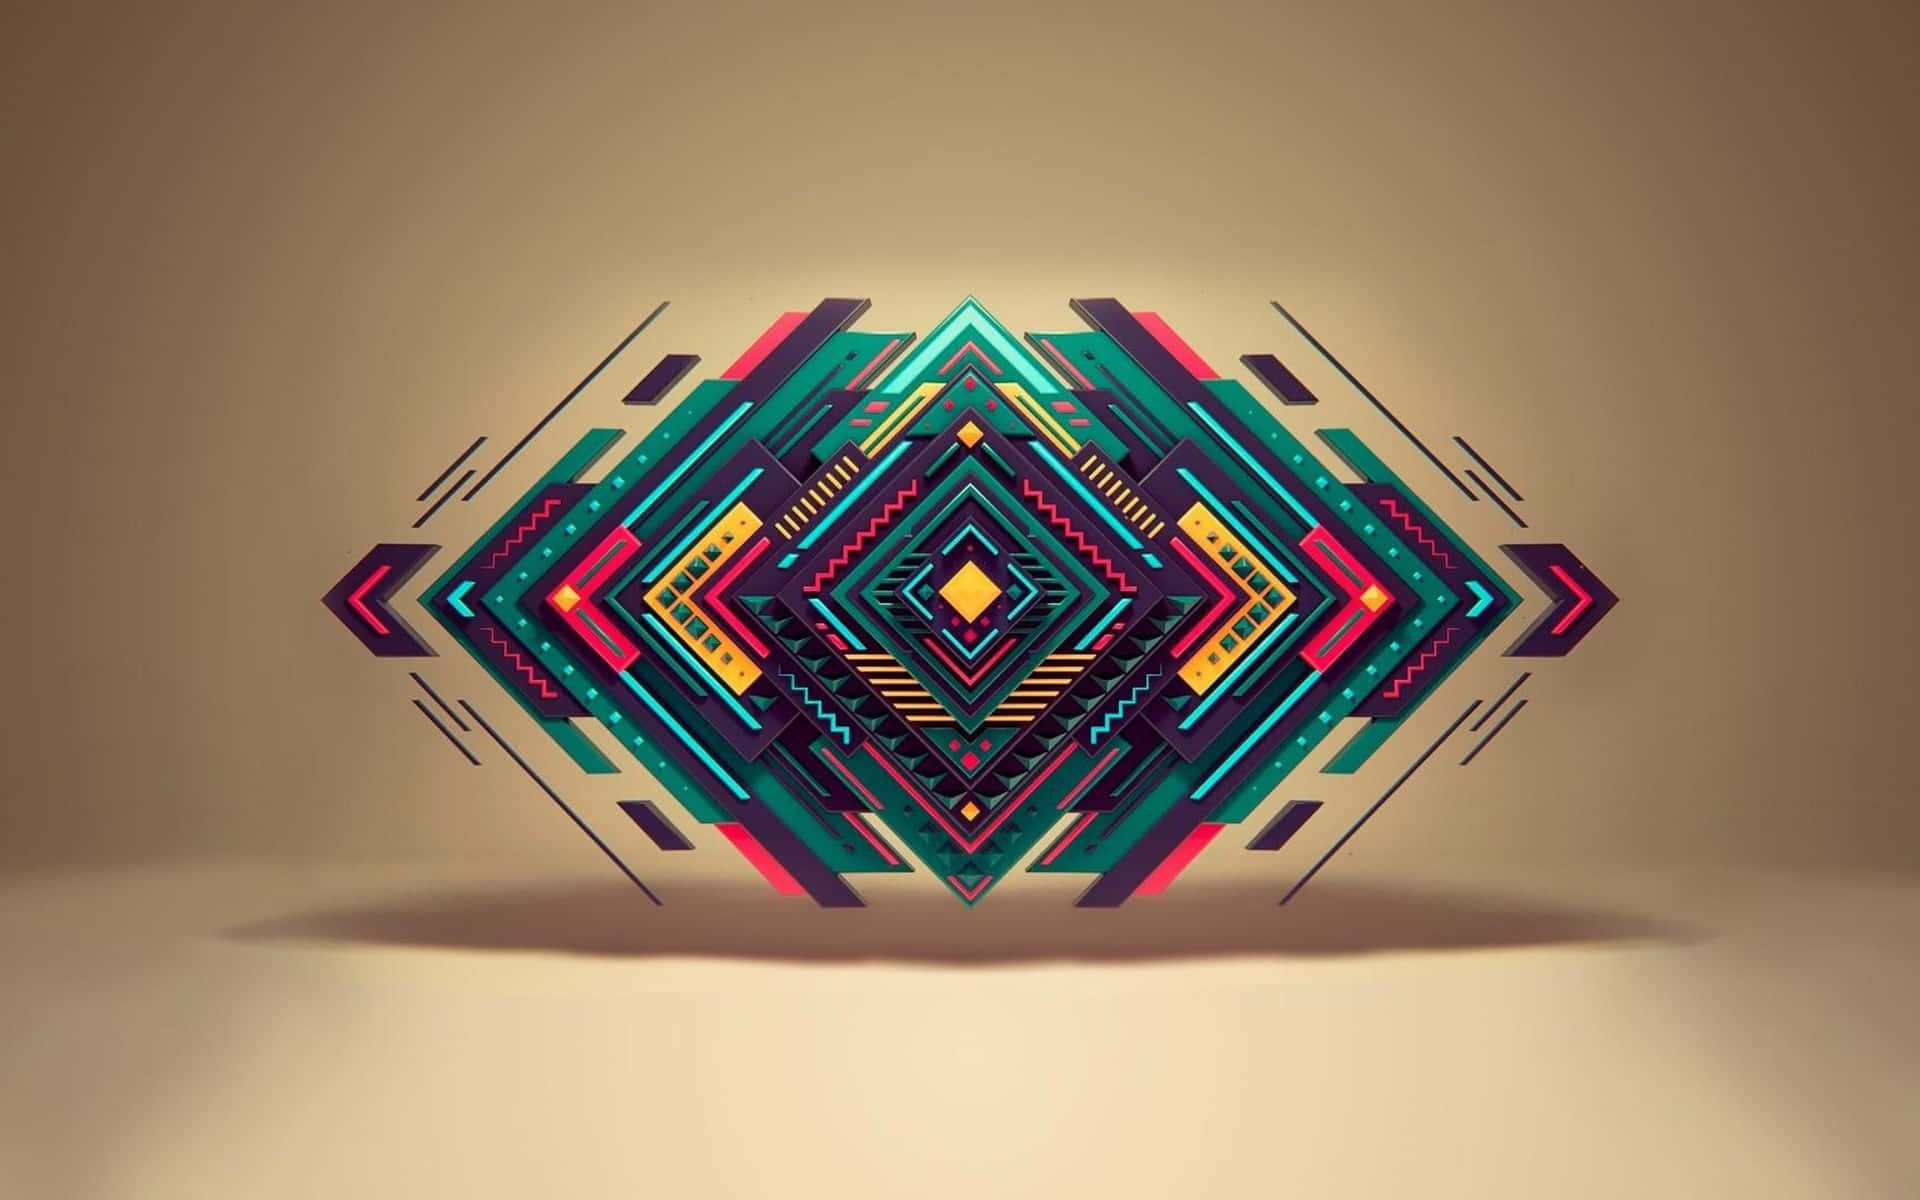 Geometric Abstract Design With Colorful Lines